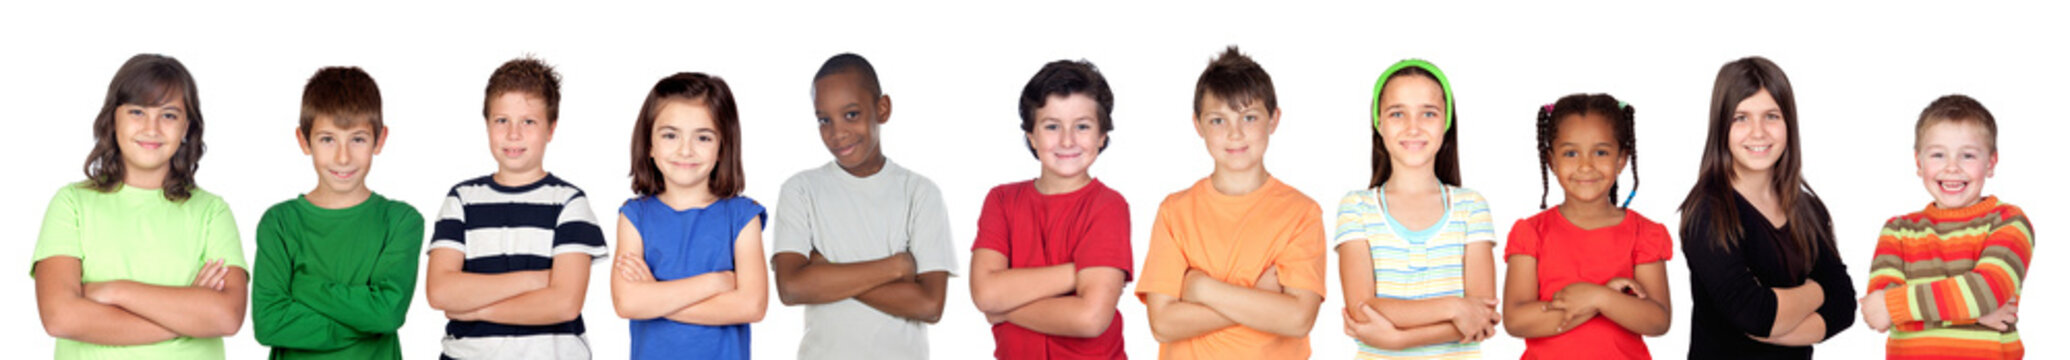 Children«s group with crossed arms